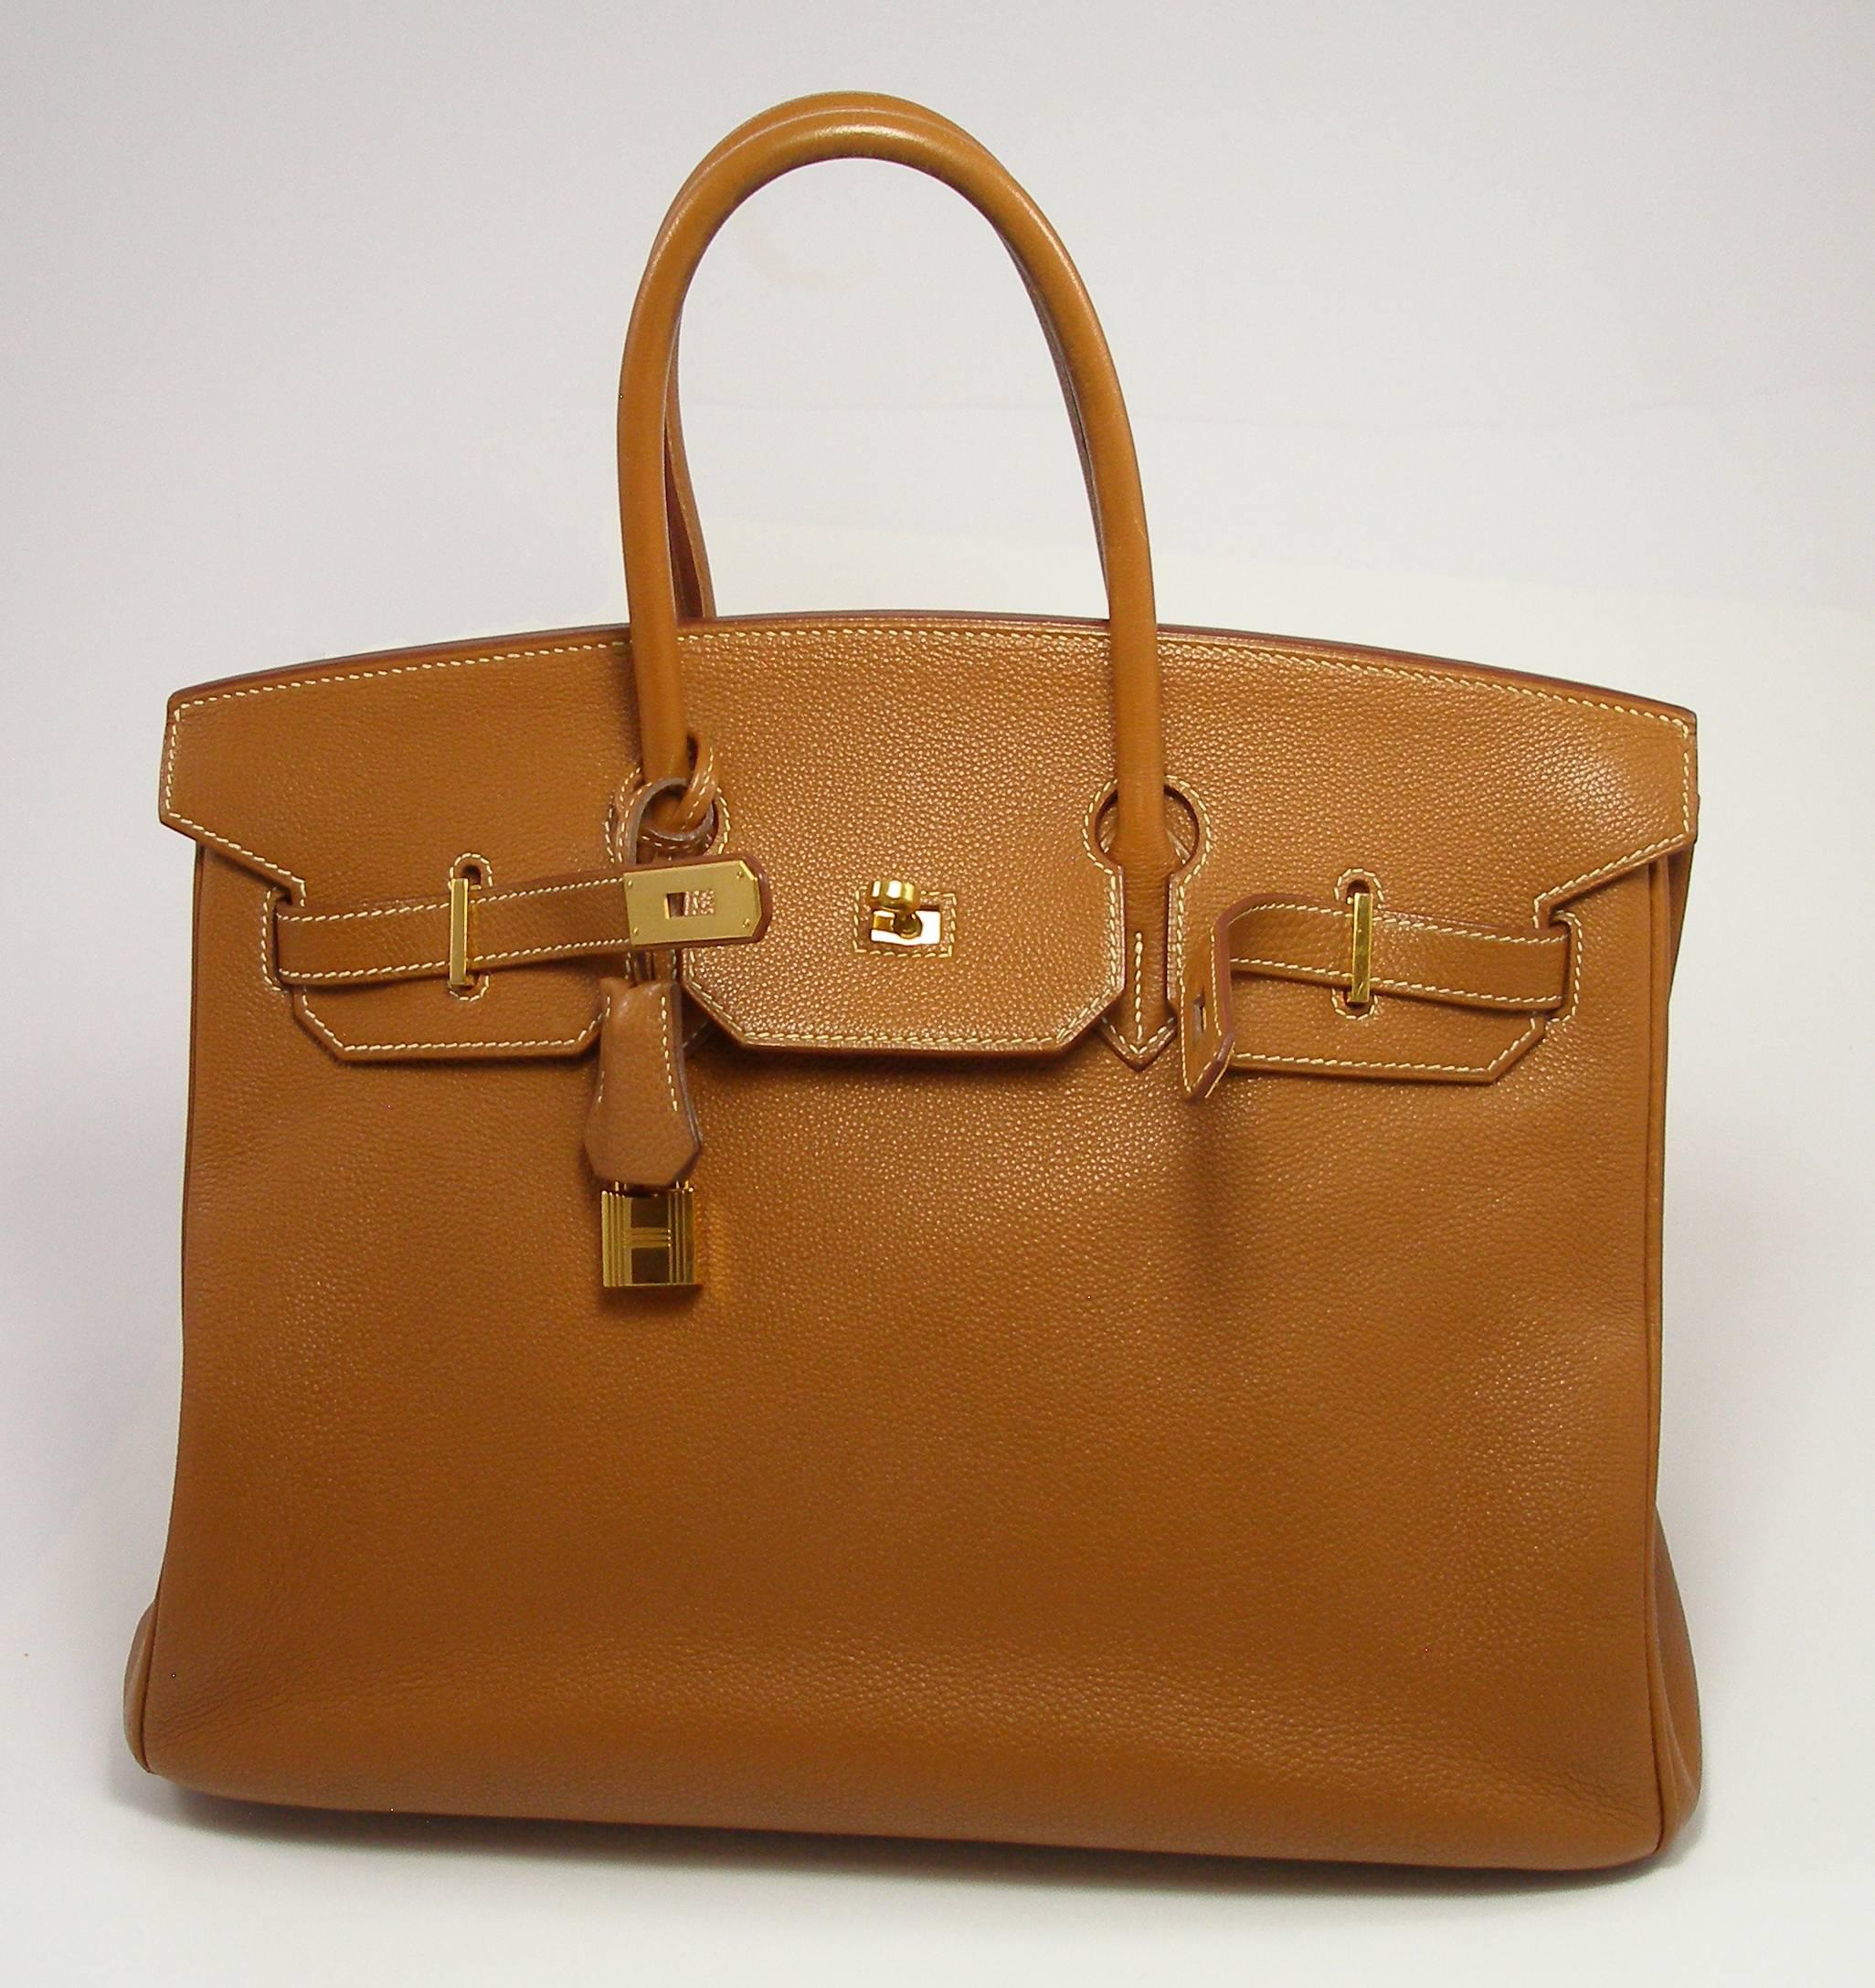 WONDERFULL Hermès Birkin bag 35 cm
RARE LEATHER / SOLD OUT IN SHOP 
Ardennes leather in FAUVE color 
VERY NICE 
Stamp : E in square / Year 2001
Good condition 
Please look at the many pictures 
THE CADENAS IS NEW
Please non négociable , it's good